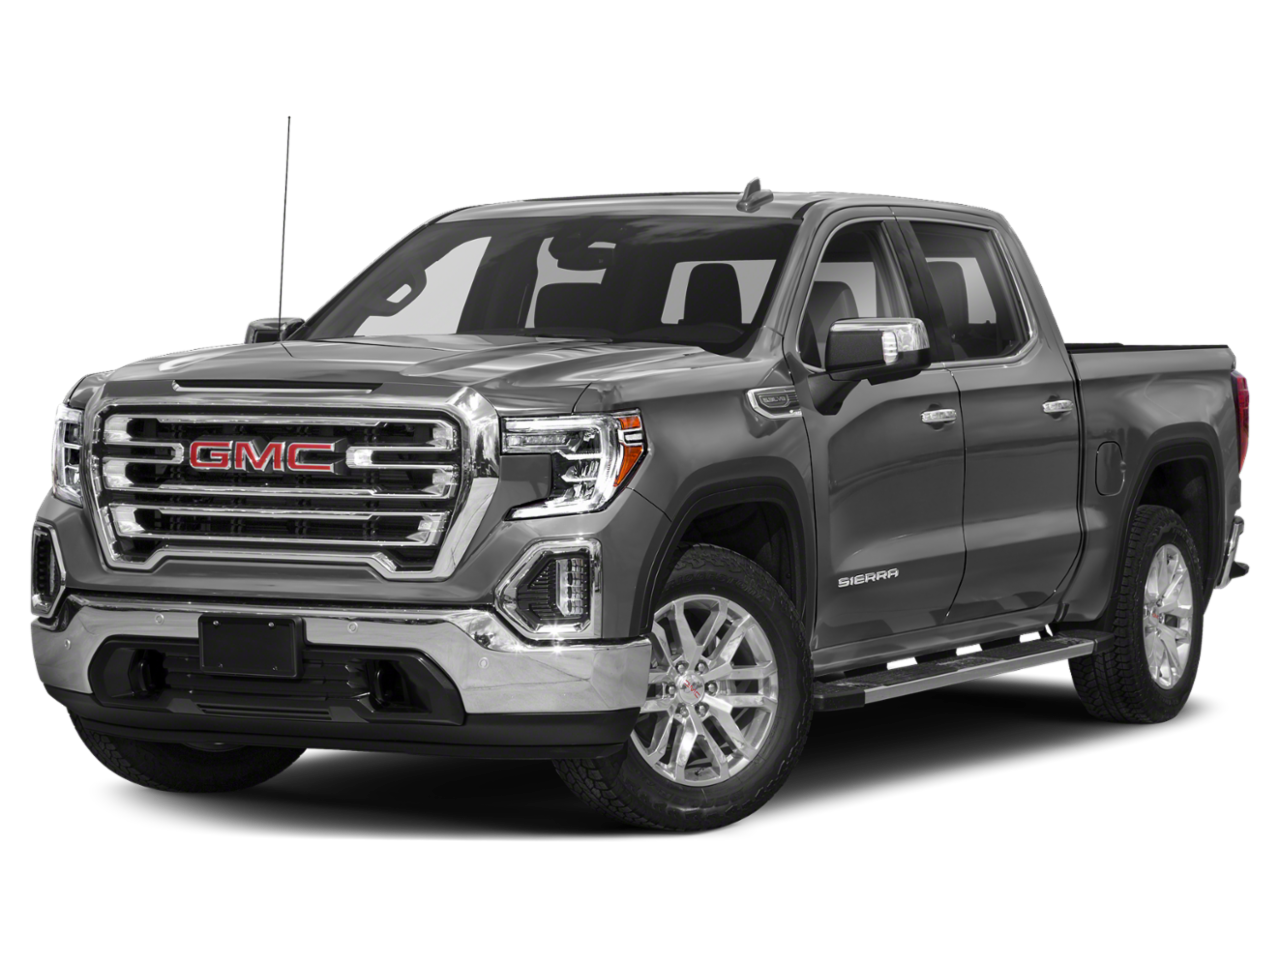 The New 2022 GMC Sierra 1500 Has Arrived at Our NEW ROADS Store